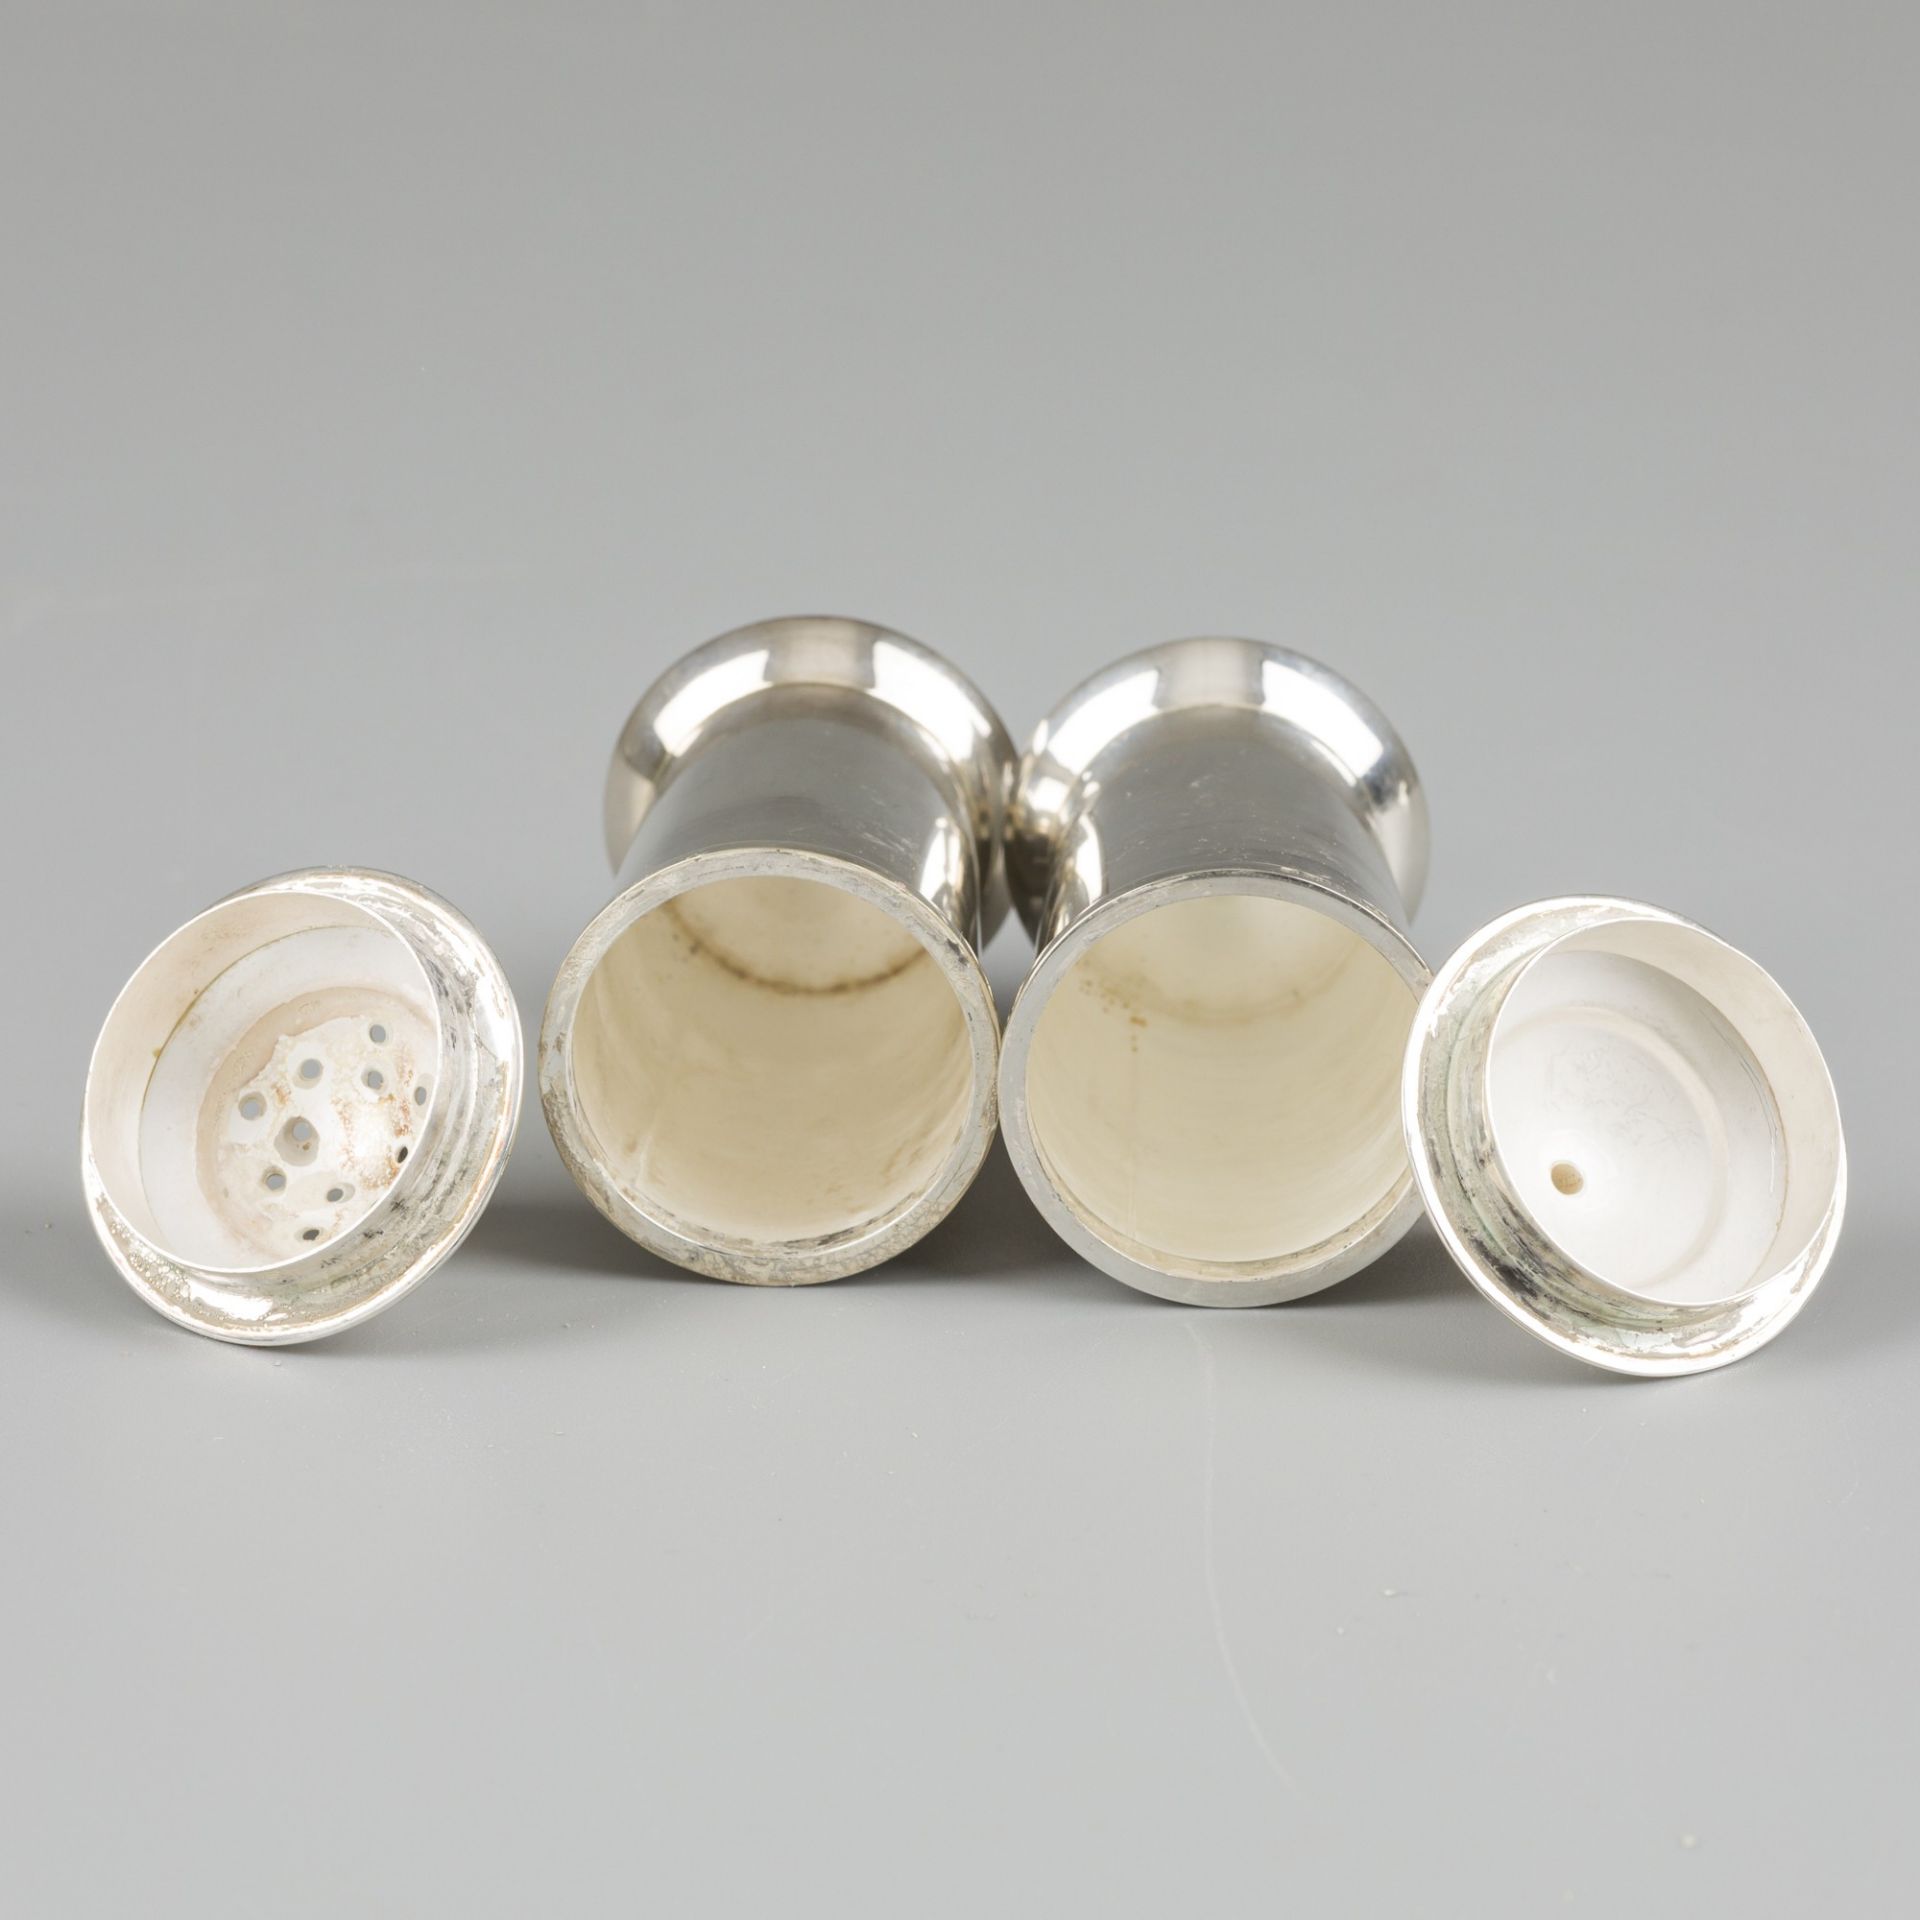 Pepper and salt shakers, silver. - Image 3 of 5